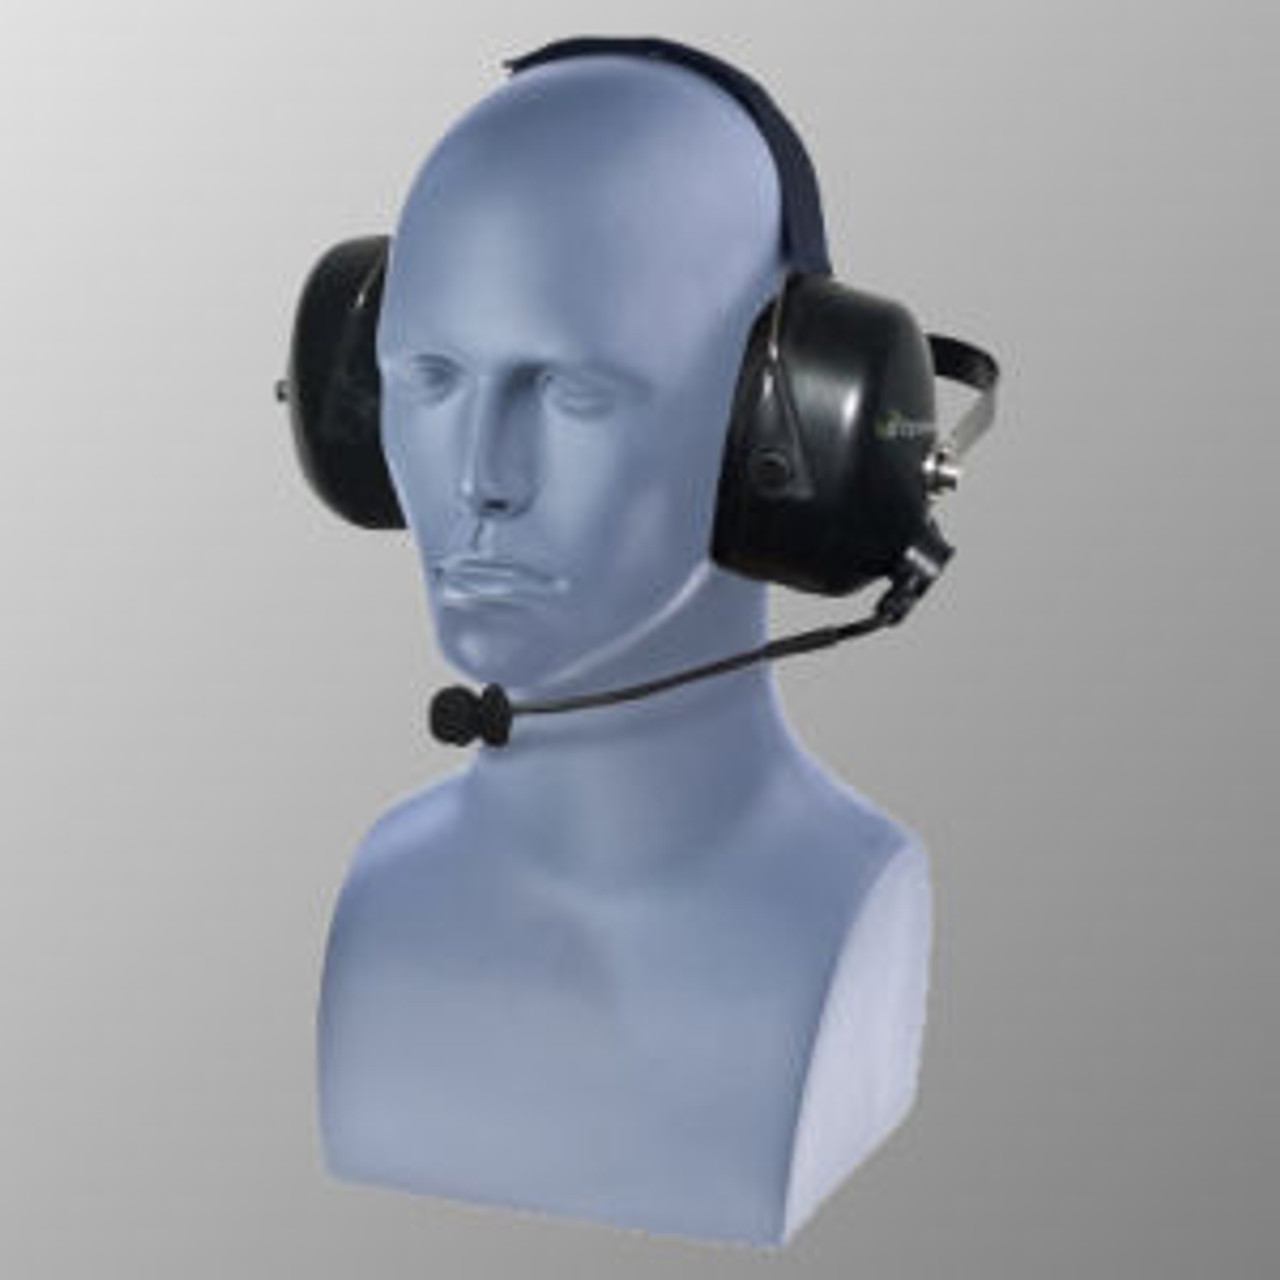 Kenwood VP5430 Noise Canceling Double Muff Behind The Head Headset